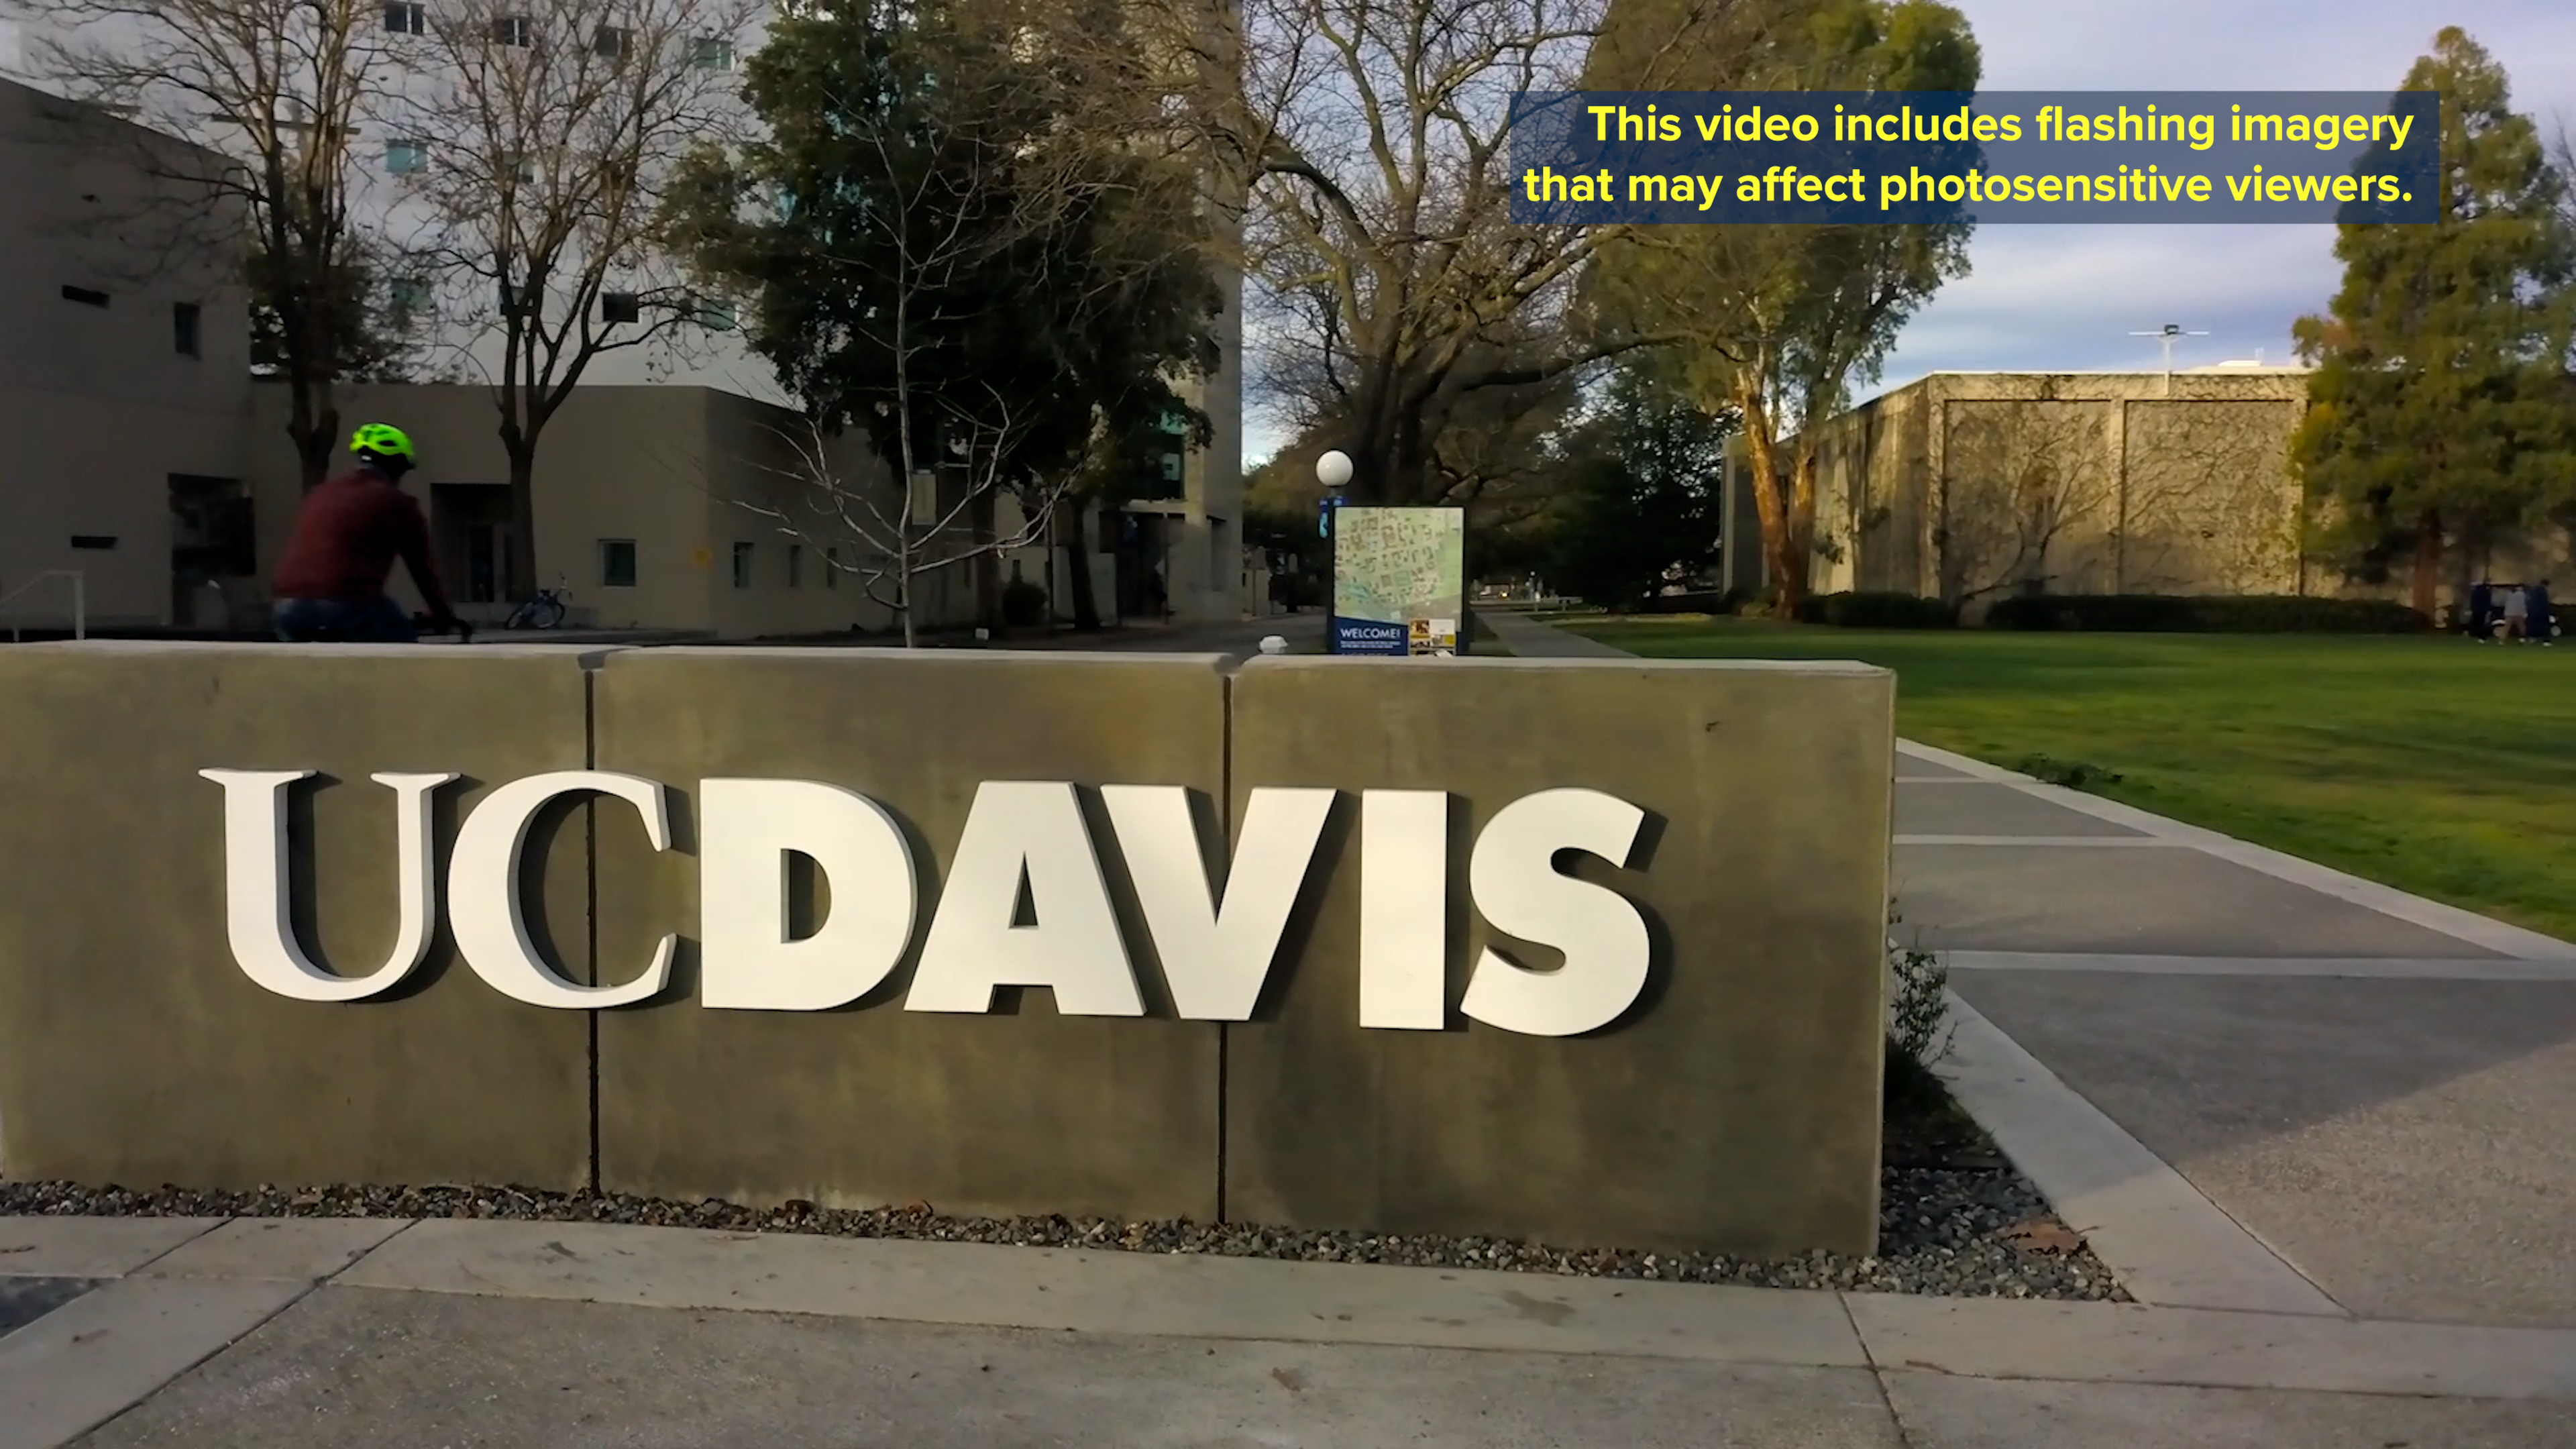 concrete UC Davis sign with white letters and disclaimer notice text